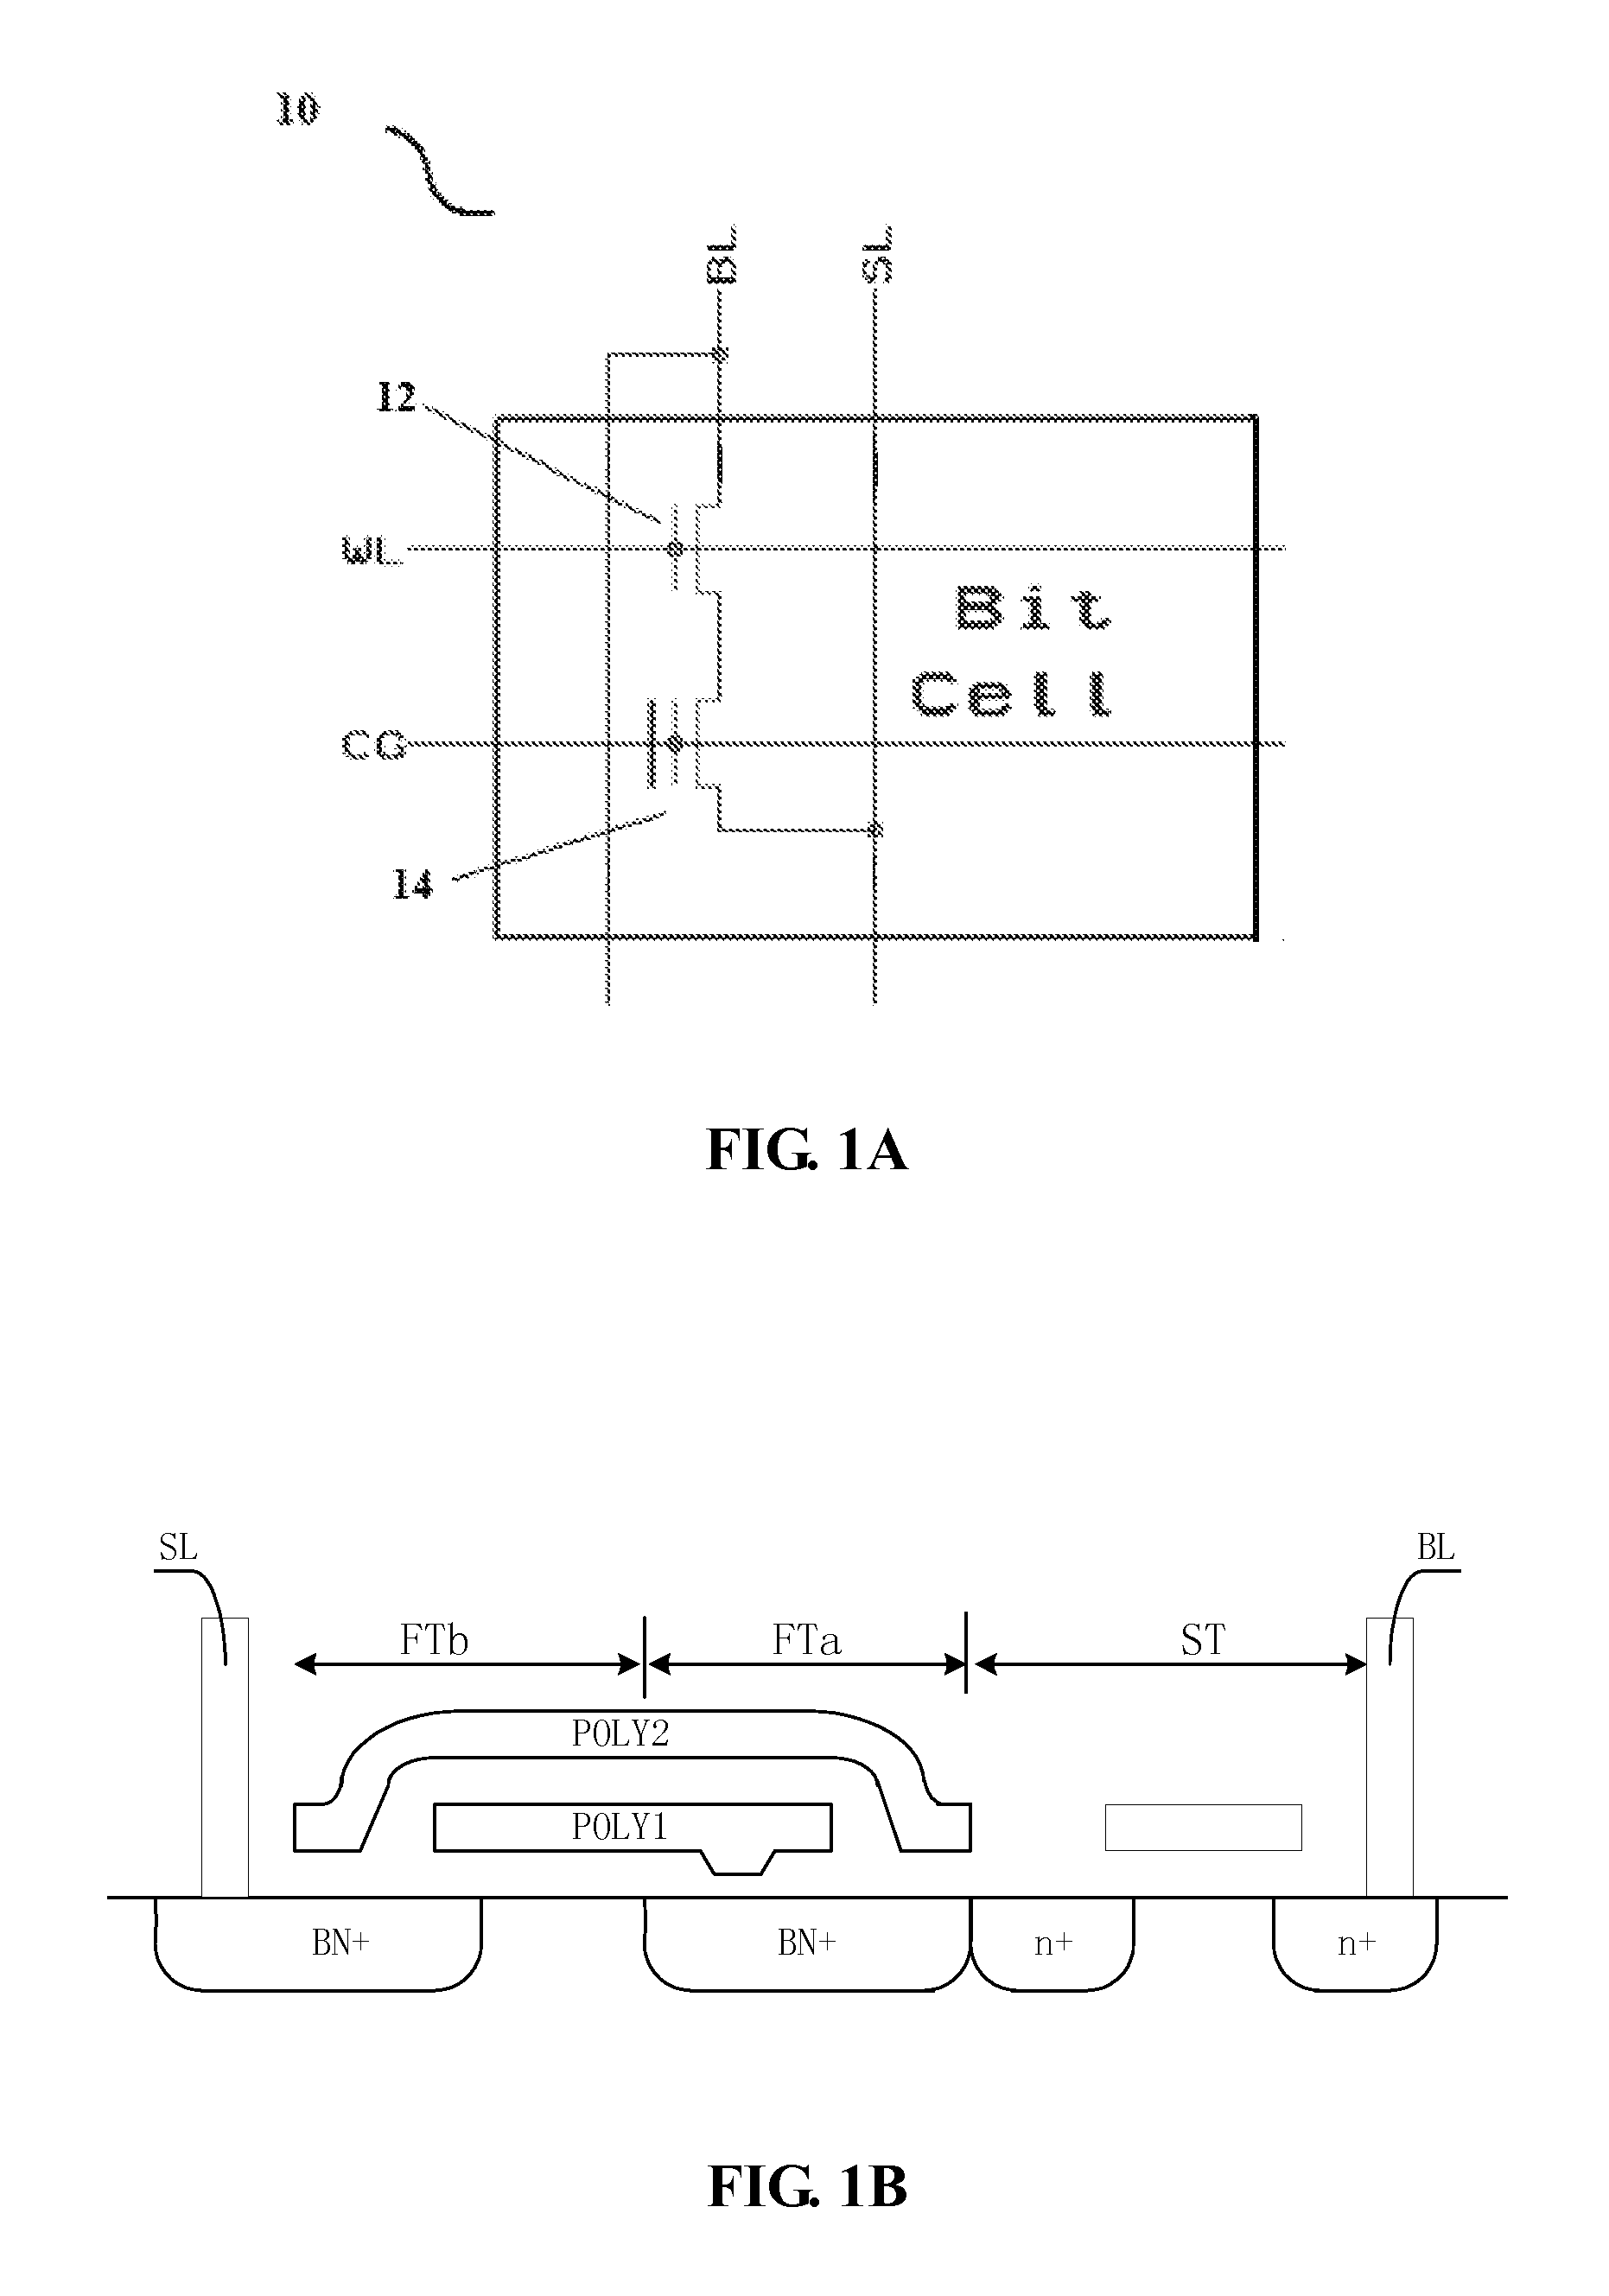 Dram-like nvm memory array and sense amplifier design for high temperature and high endurance operation